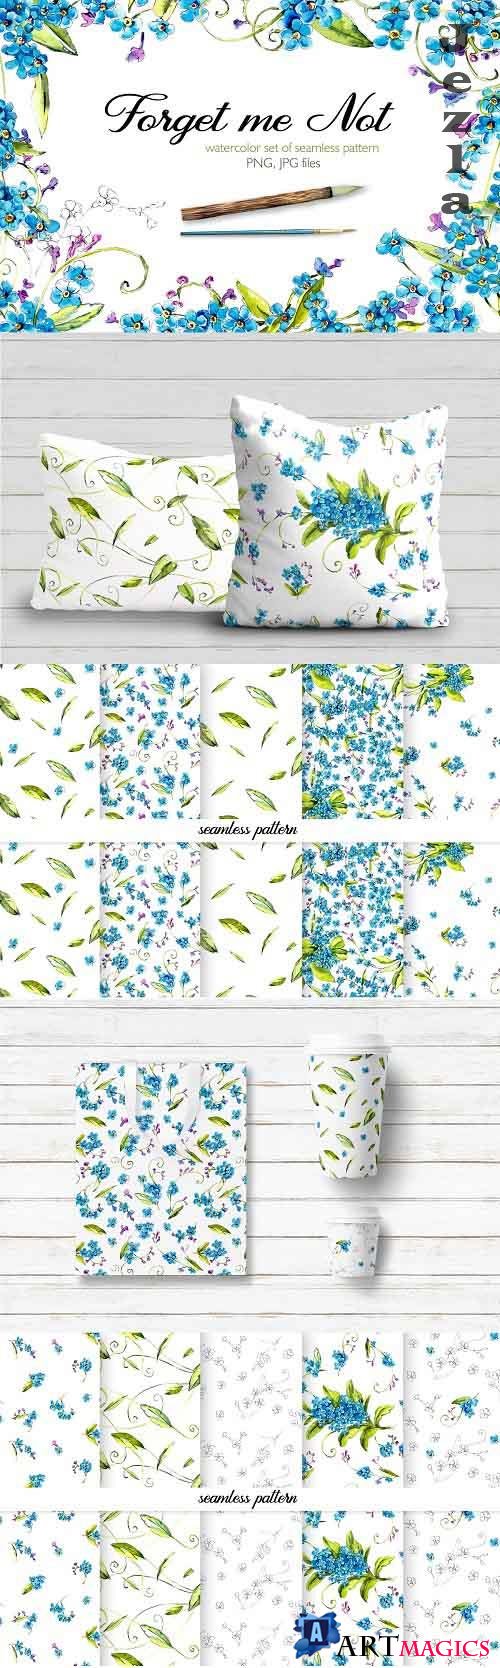 Seamless pattern of forget-me-not - 3816723